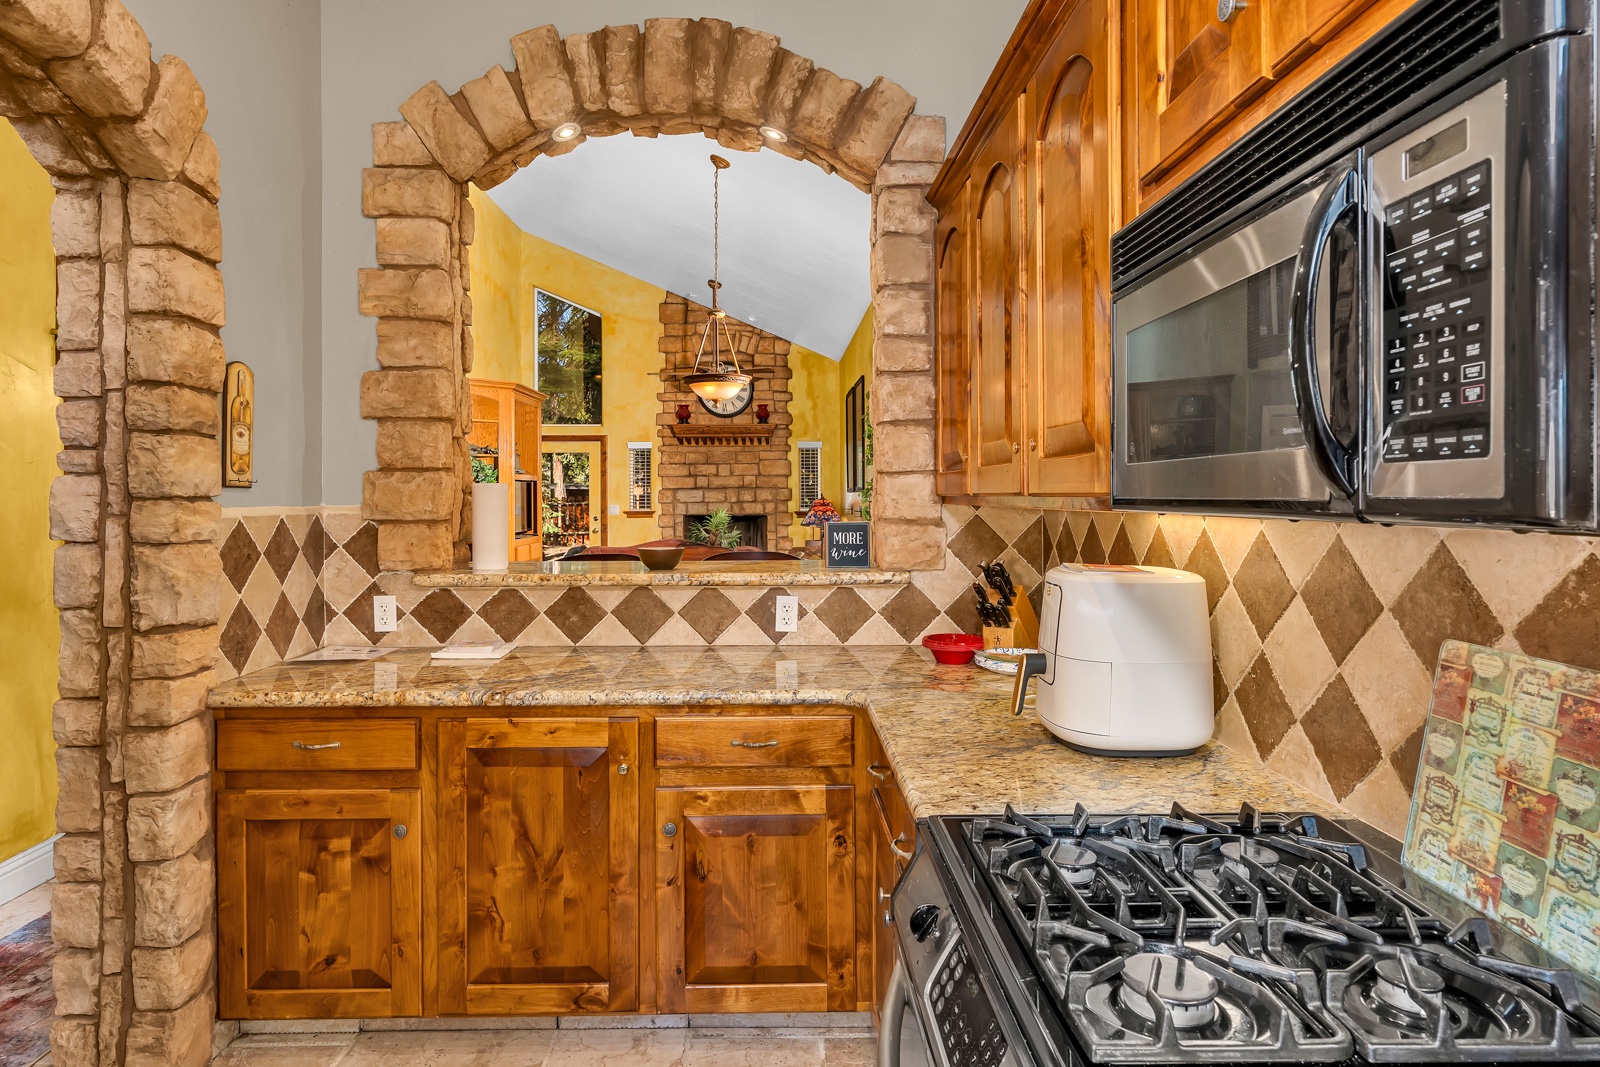 The gorgeous kitchen offers ample space & all the comforts of home